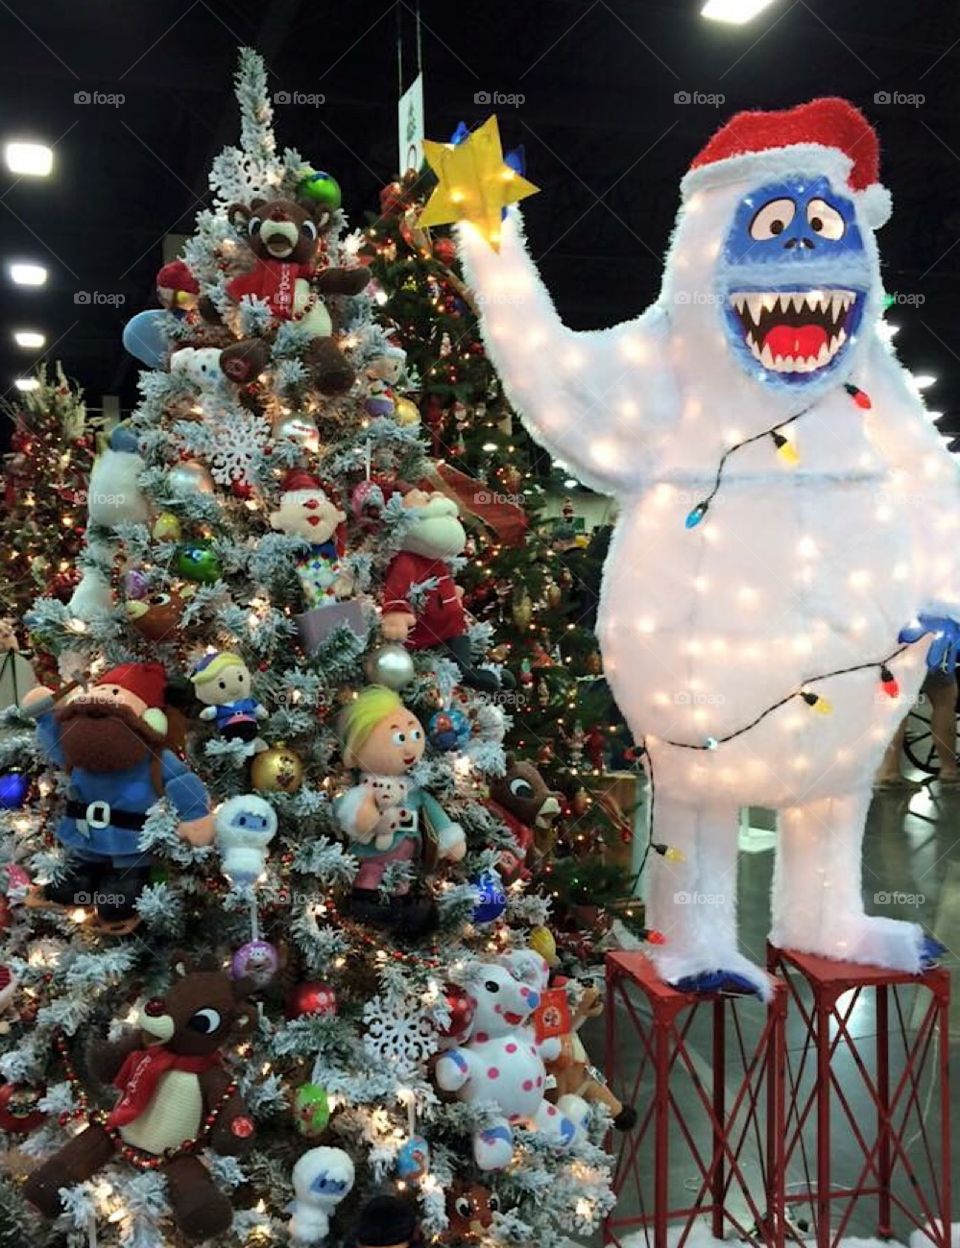 Rudolph Christmas tree and the bumbling abominable snowman at the Festival of Trees fundraiser in SLC.